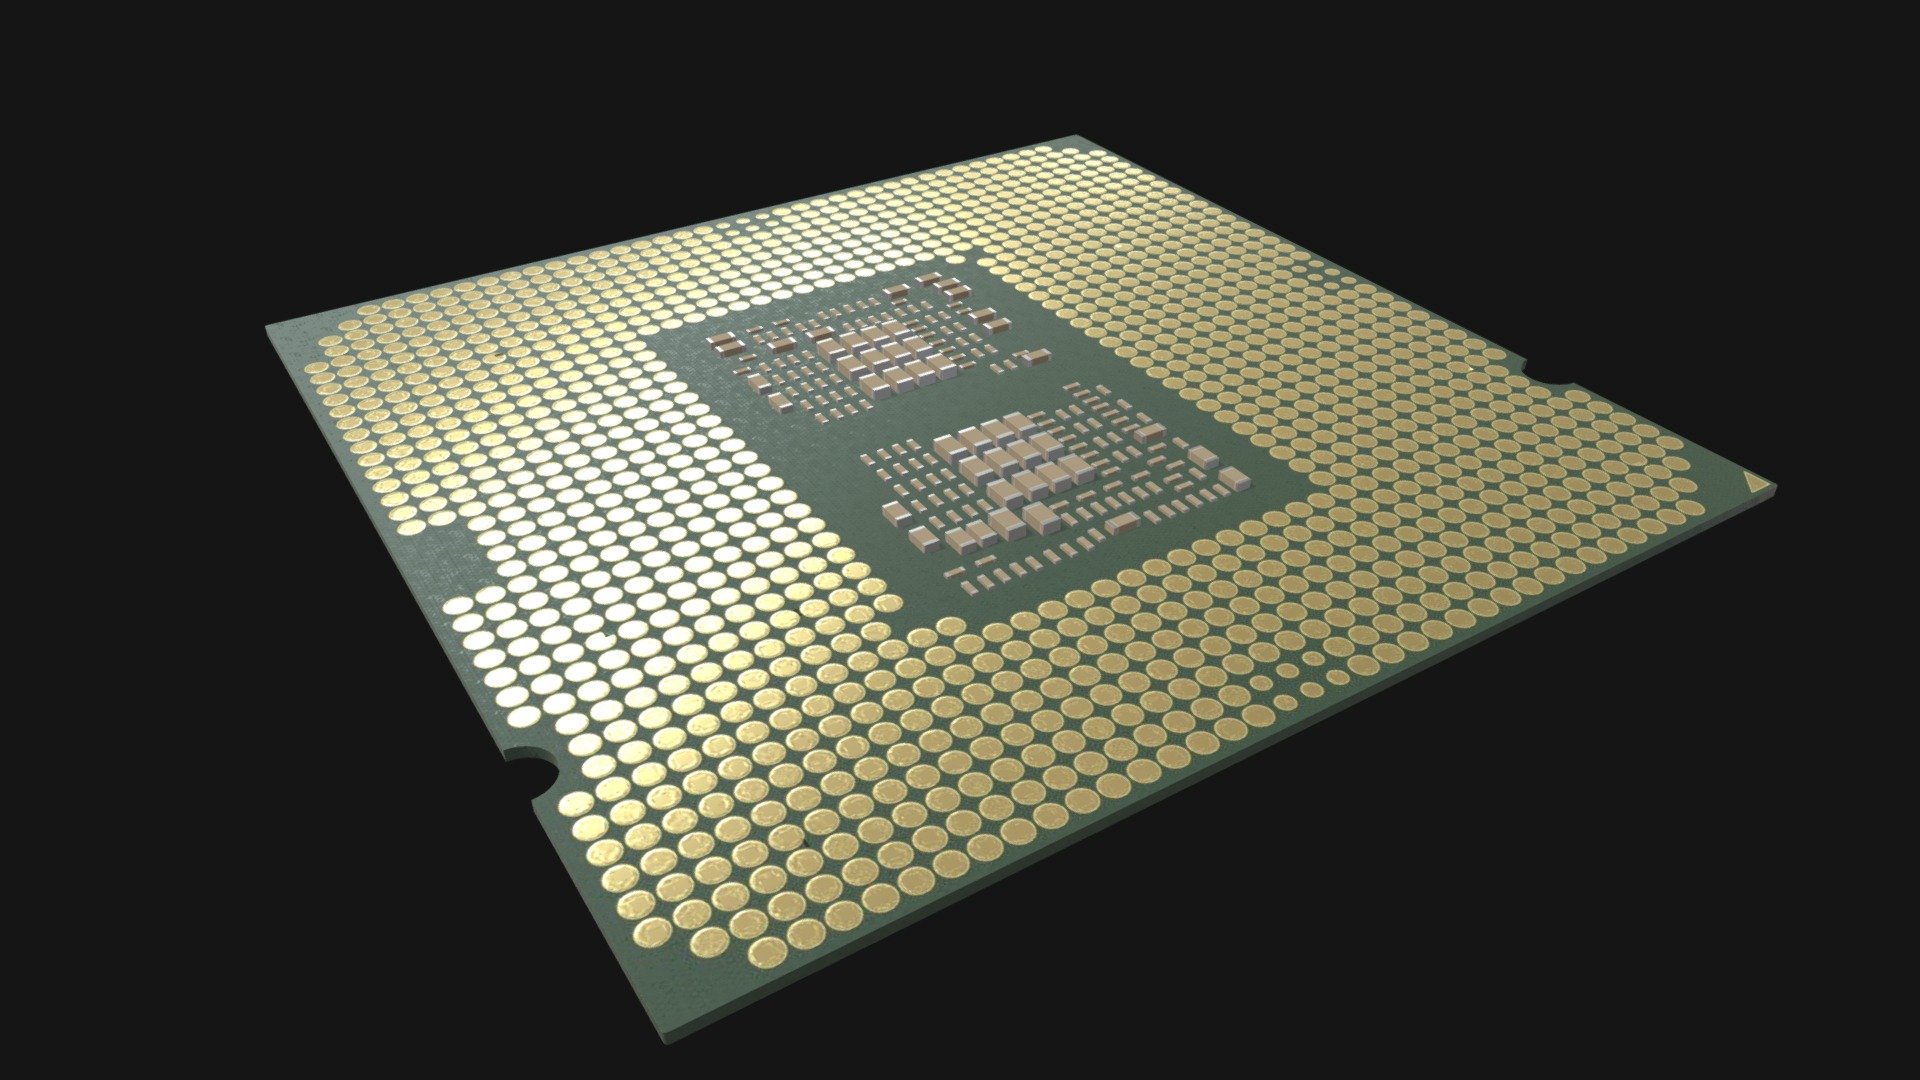 === The following description refers to the additional ZIP package provided with this model ===

CPU microchip 3D Model. Production-ready 3D Model, with PBR materials, textures, non overlapping UV Layout map provided in the package.

Quads only geometries (no tris/ngons).

Formats included: FBX, OBJ; scenes: BLEND (with Cycles / Eevee PBR Materials and Textures); other: png with Alpha.

1 Object (mesh), 1 PBR Material, UV unwrapped (non overlapping UV Layout map provided in the package); UV-mapped Textures.

UV Layout maps and Image Textures resolutions: 2048x2048; PBR Textures made with Substance Painter.

Polygonal, QUADS ONLY (no tris/ngons); 19598 vertices, 17882 quad faces (35764 tris).

Real world dimensions; scene scale units: cm in Blender 3.1 (that is: Metric with 0.01 scale).

Uniform scale object (scale applied in Blender 3.1) 3d model